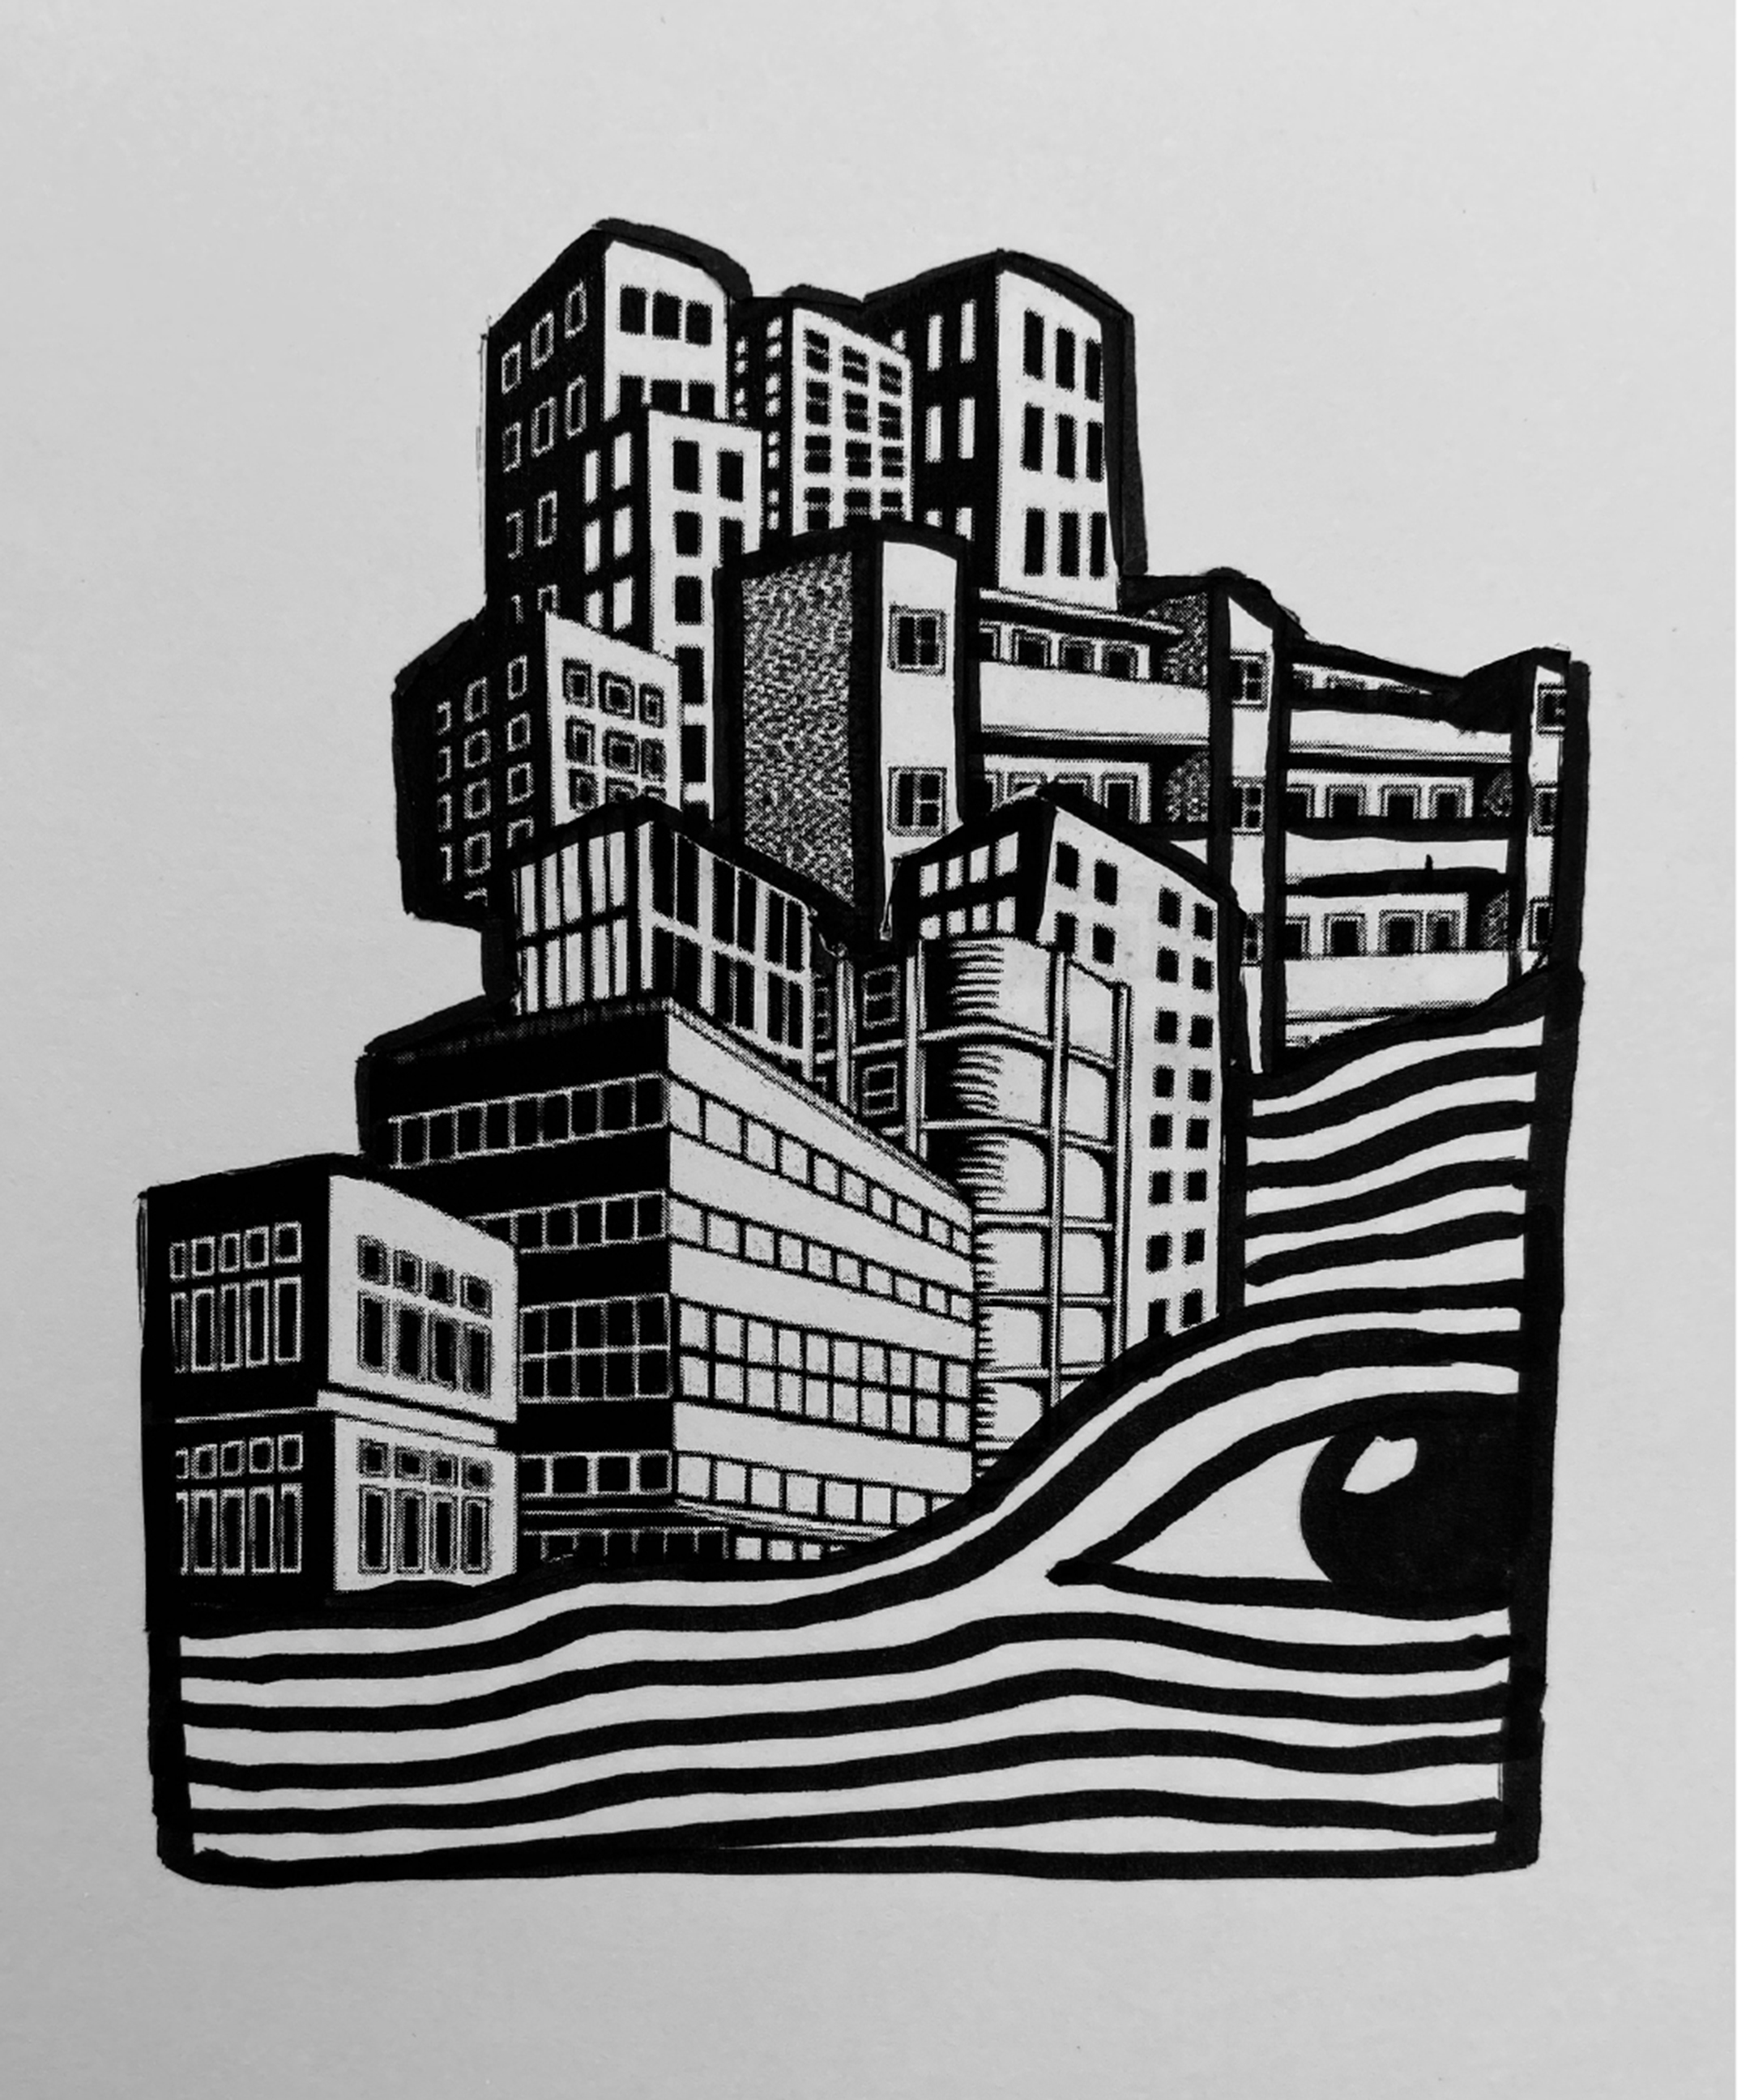 Black and white wood block print of a city scene with an eye at the bottom